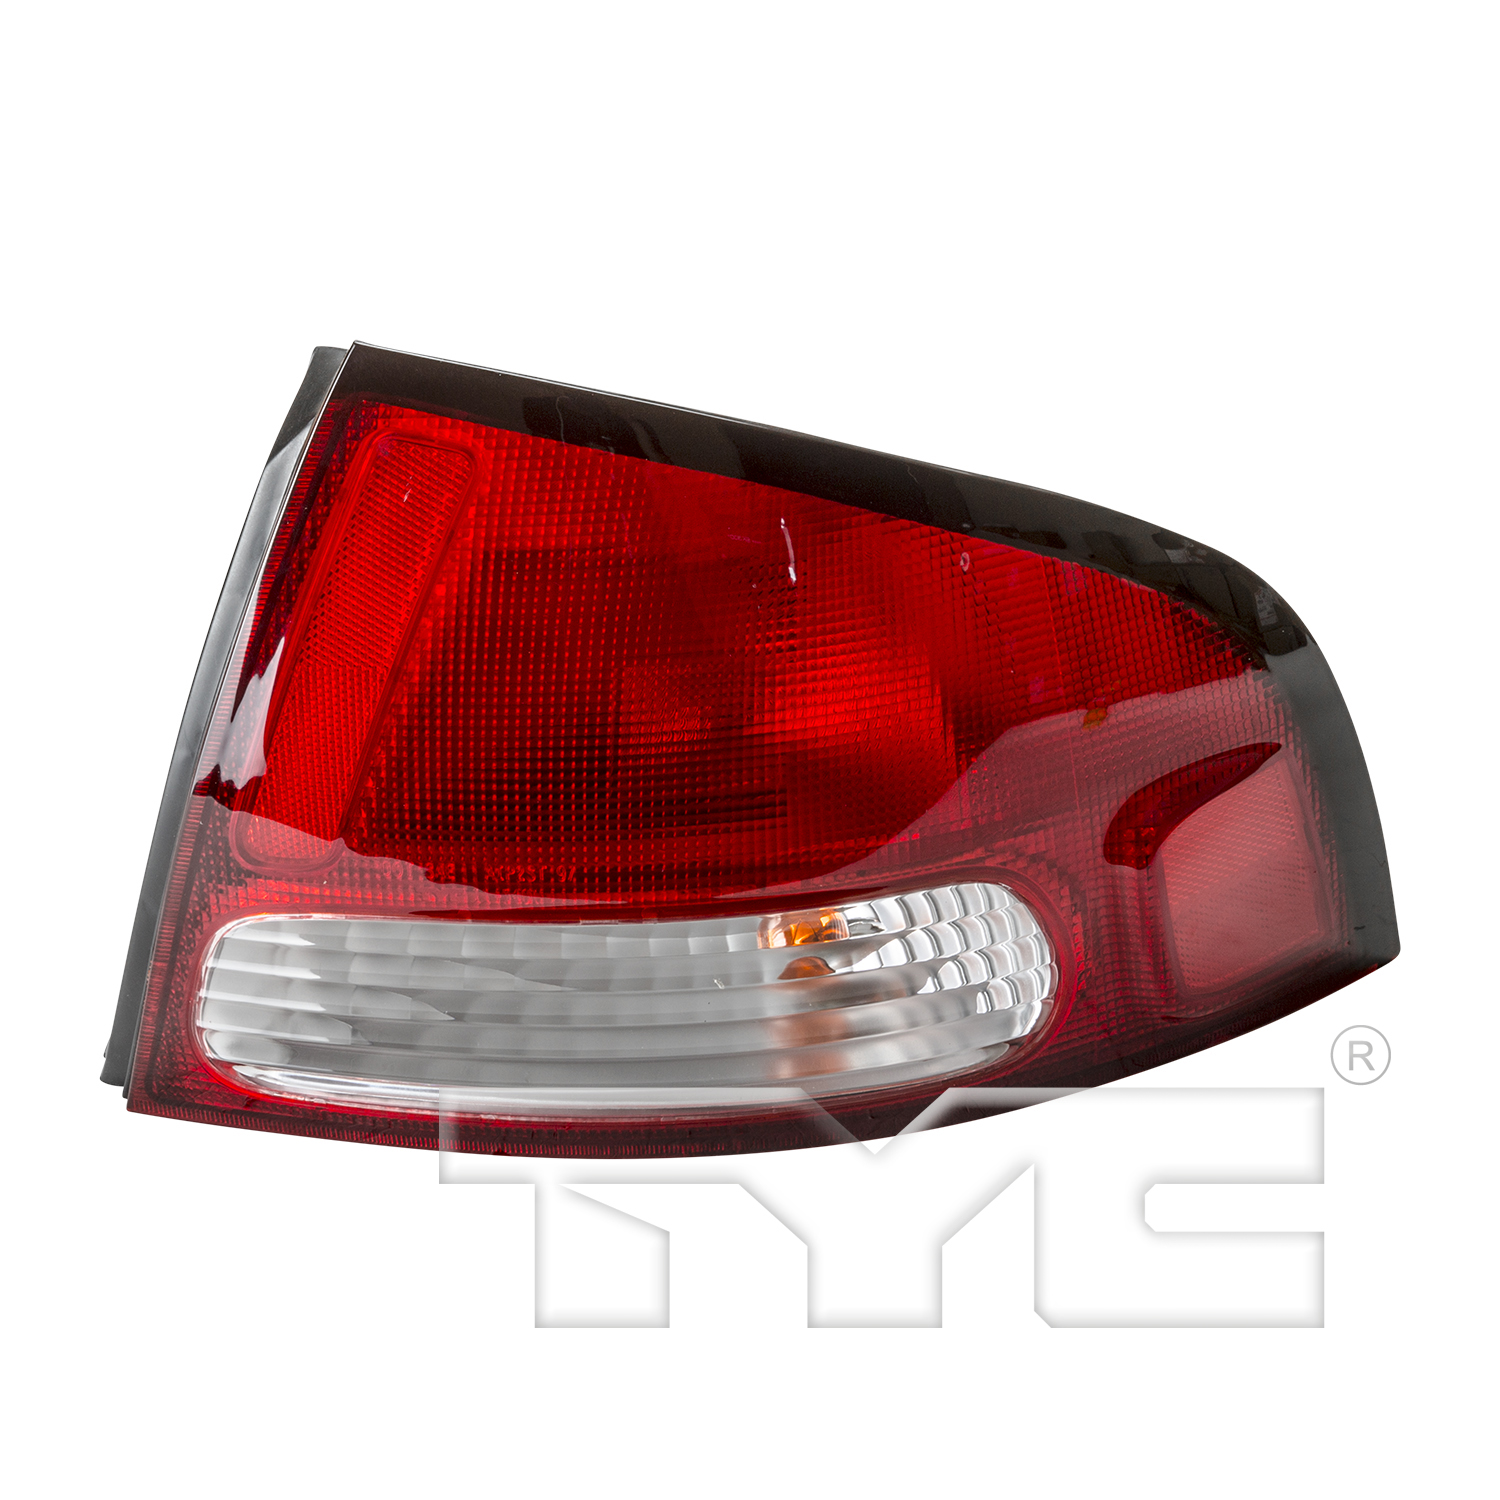 Aftermarket TAILLIGHTS for NISSAN - SENTRA, SENTRA,00-03,RT Taillamp assy